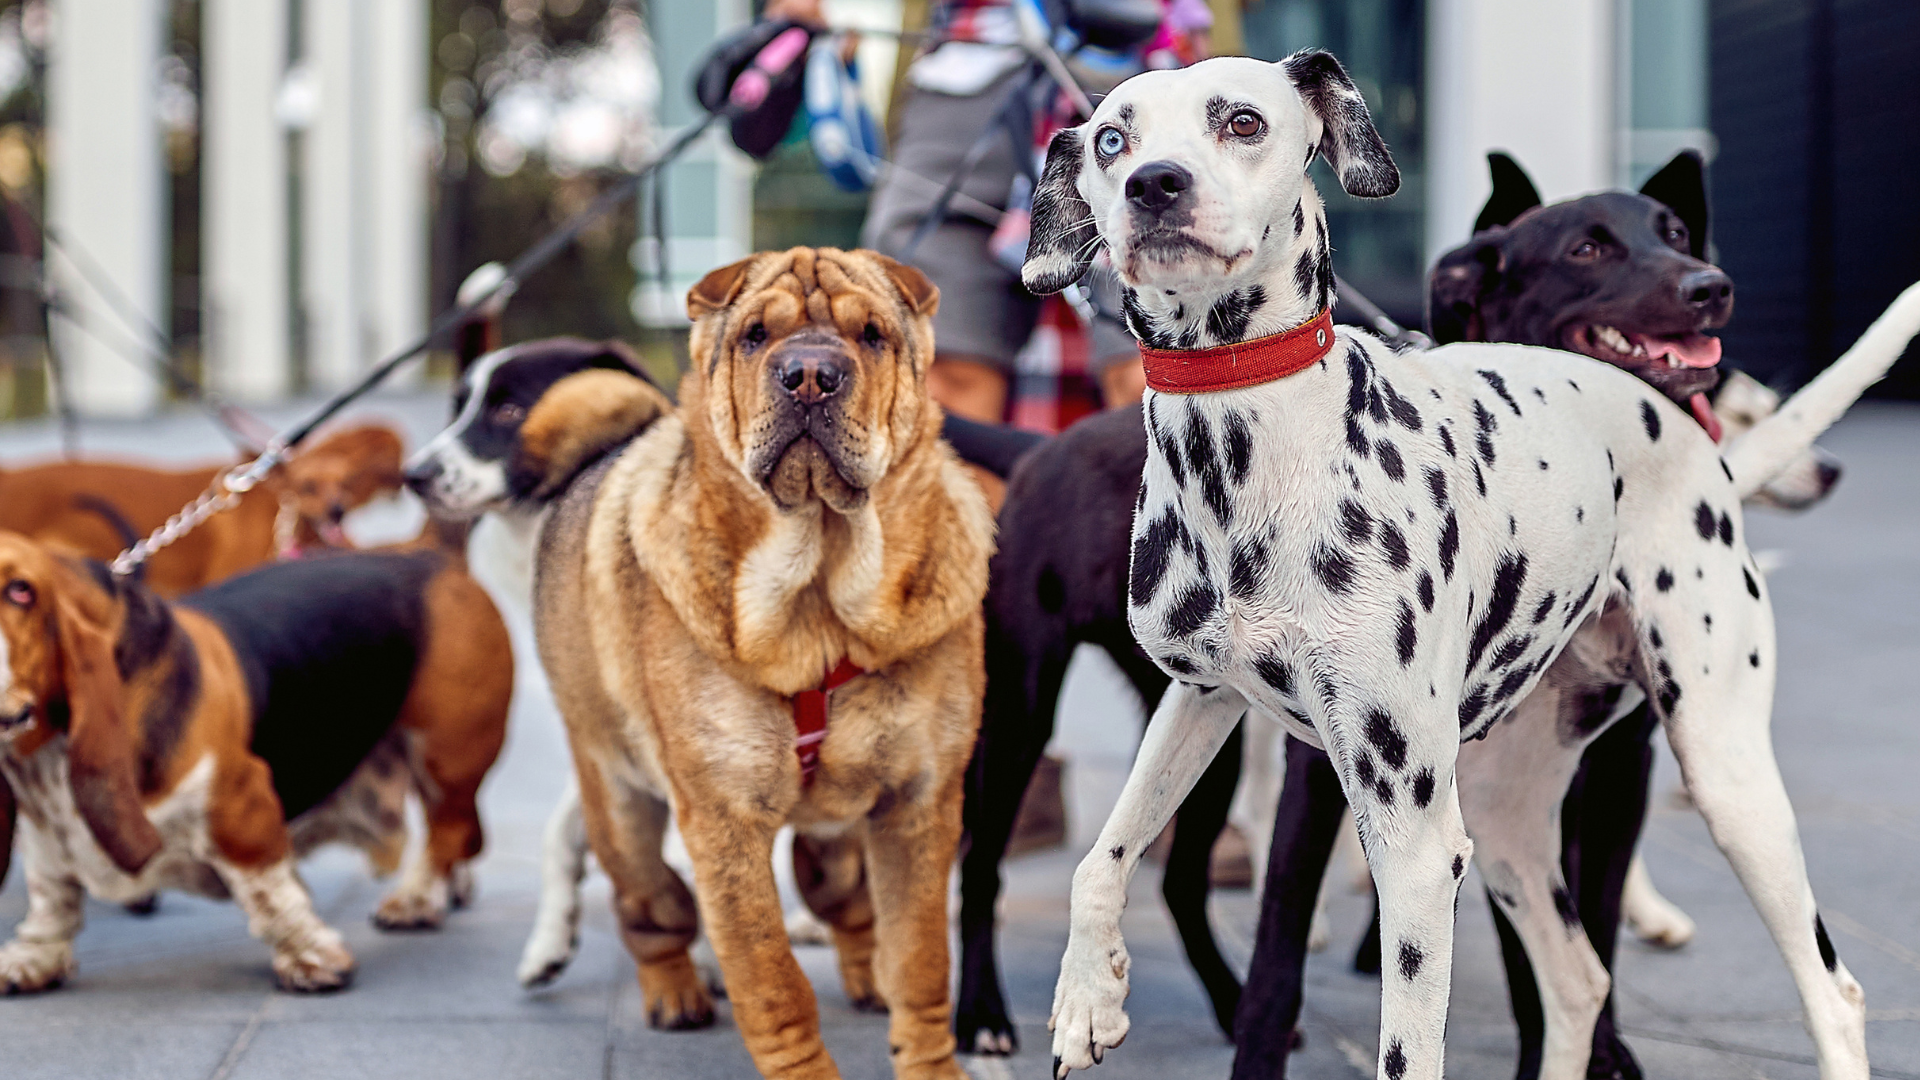 Essentials for starting a dog walking business in your neighborhood